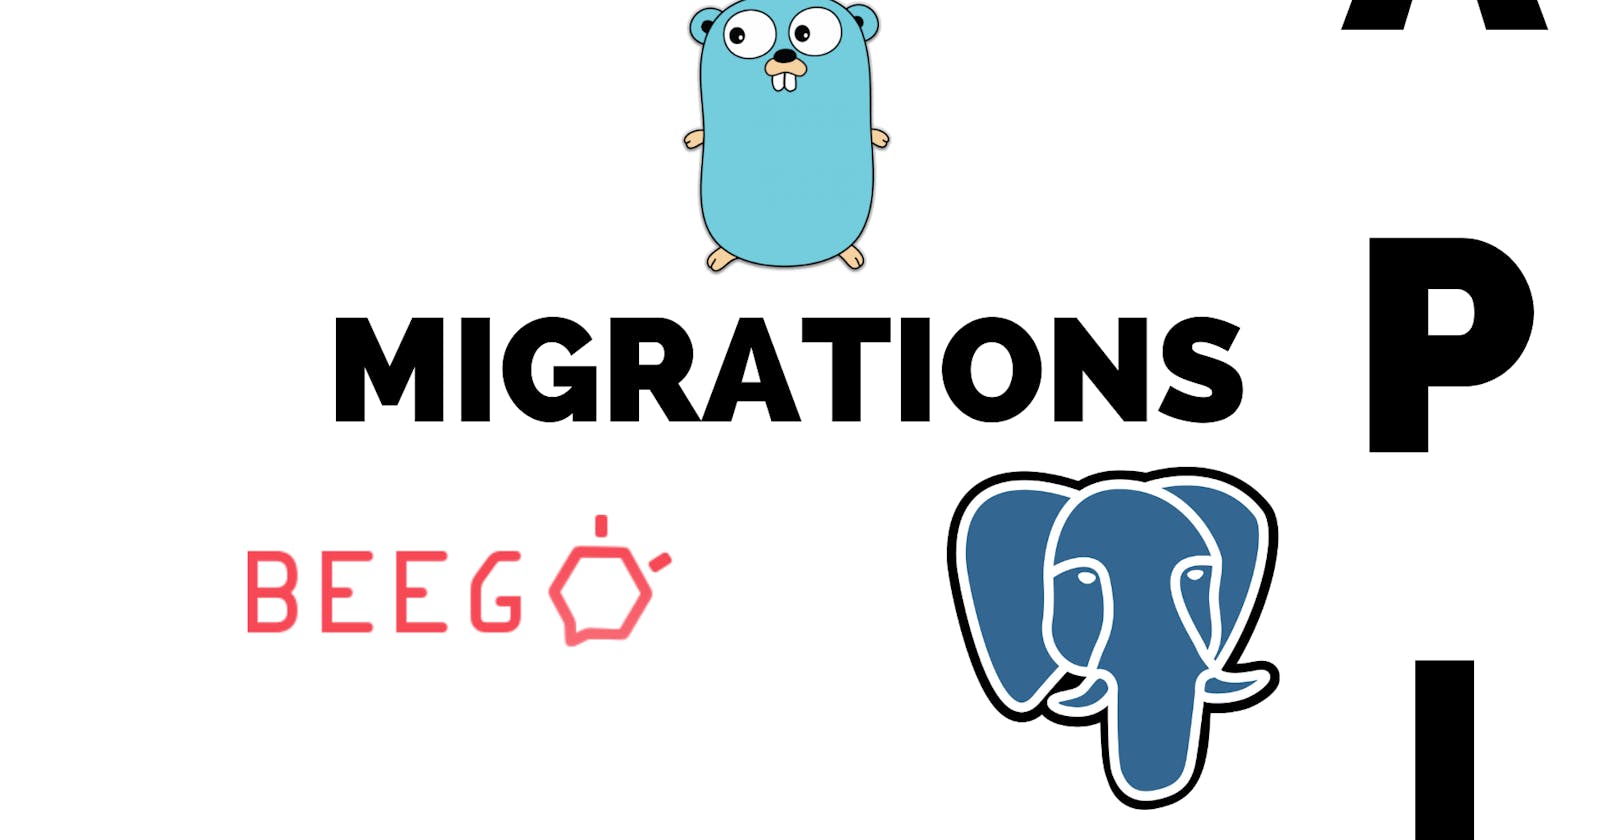 Database migrations with golang using beego